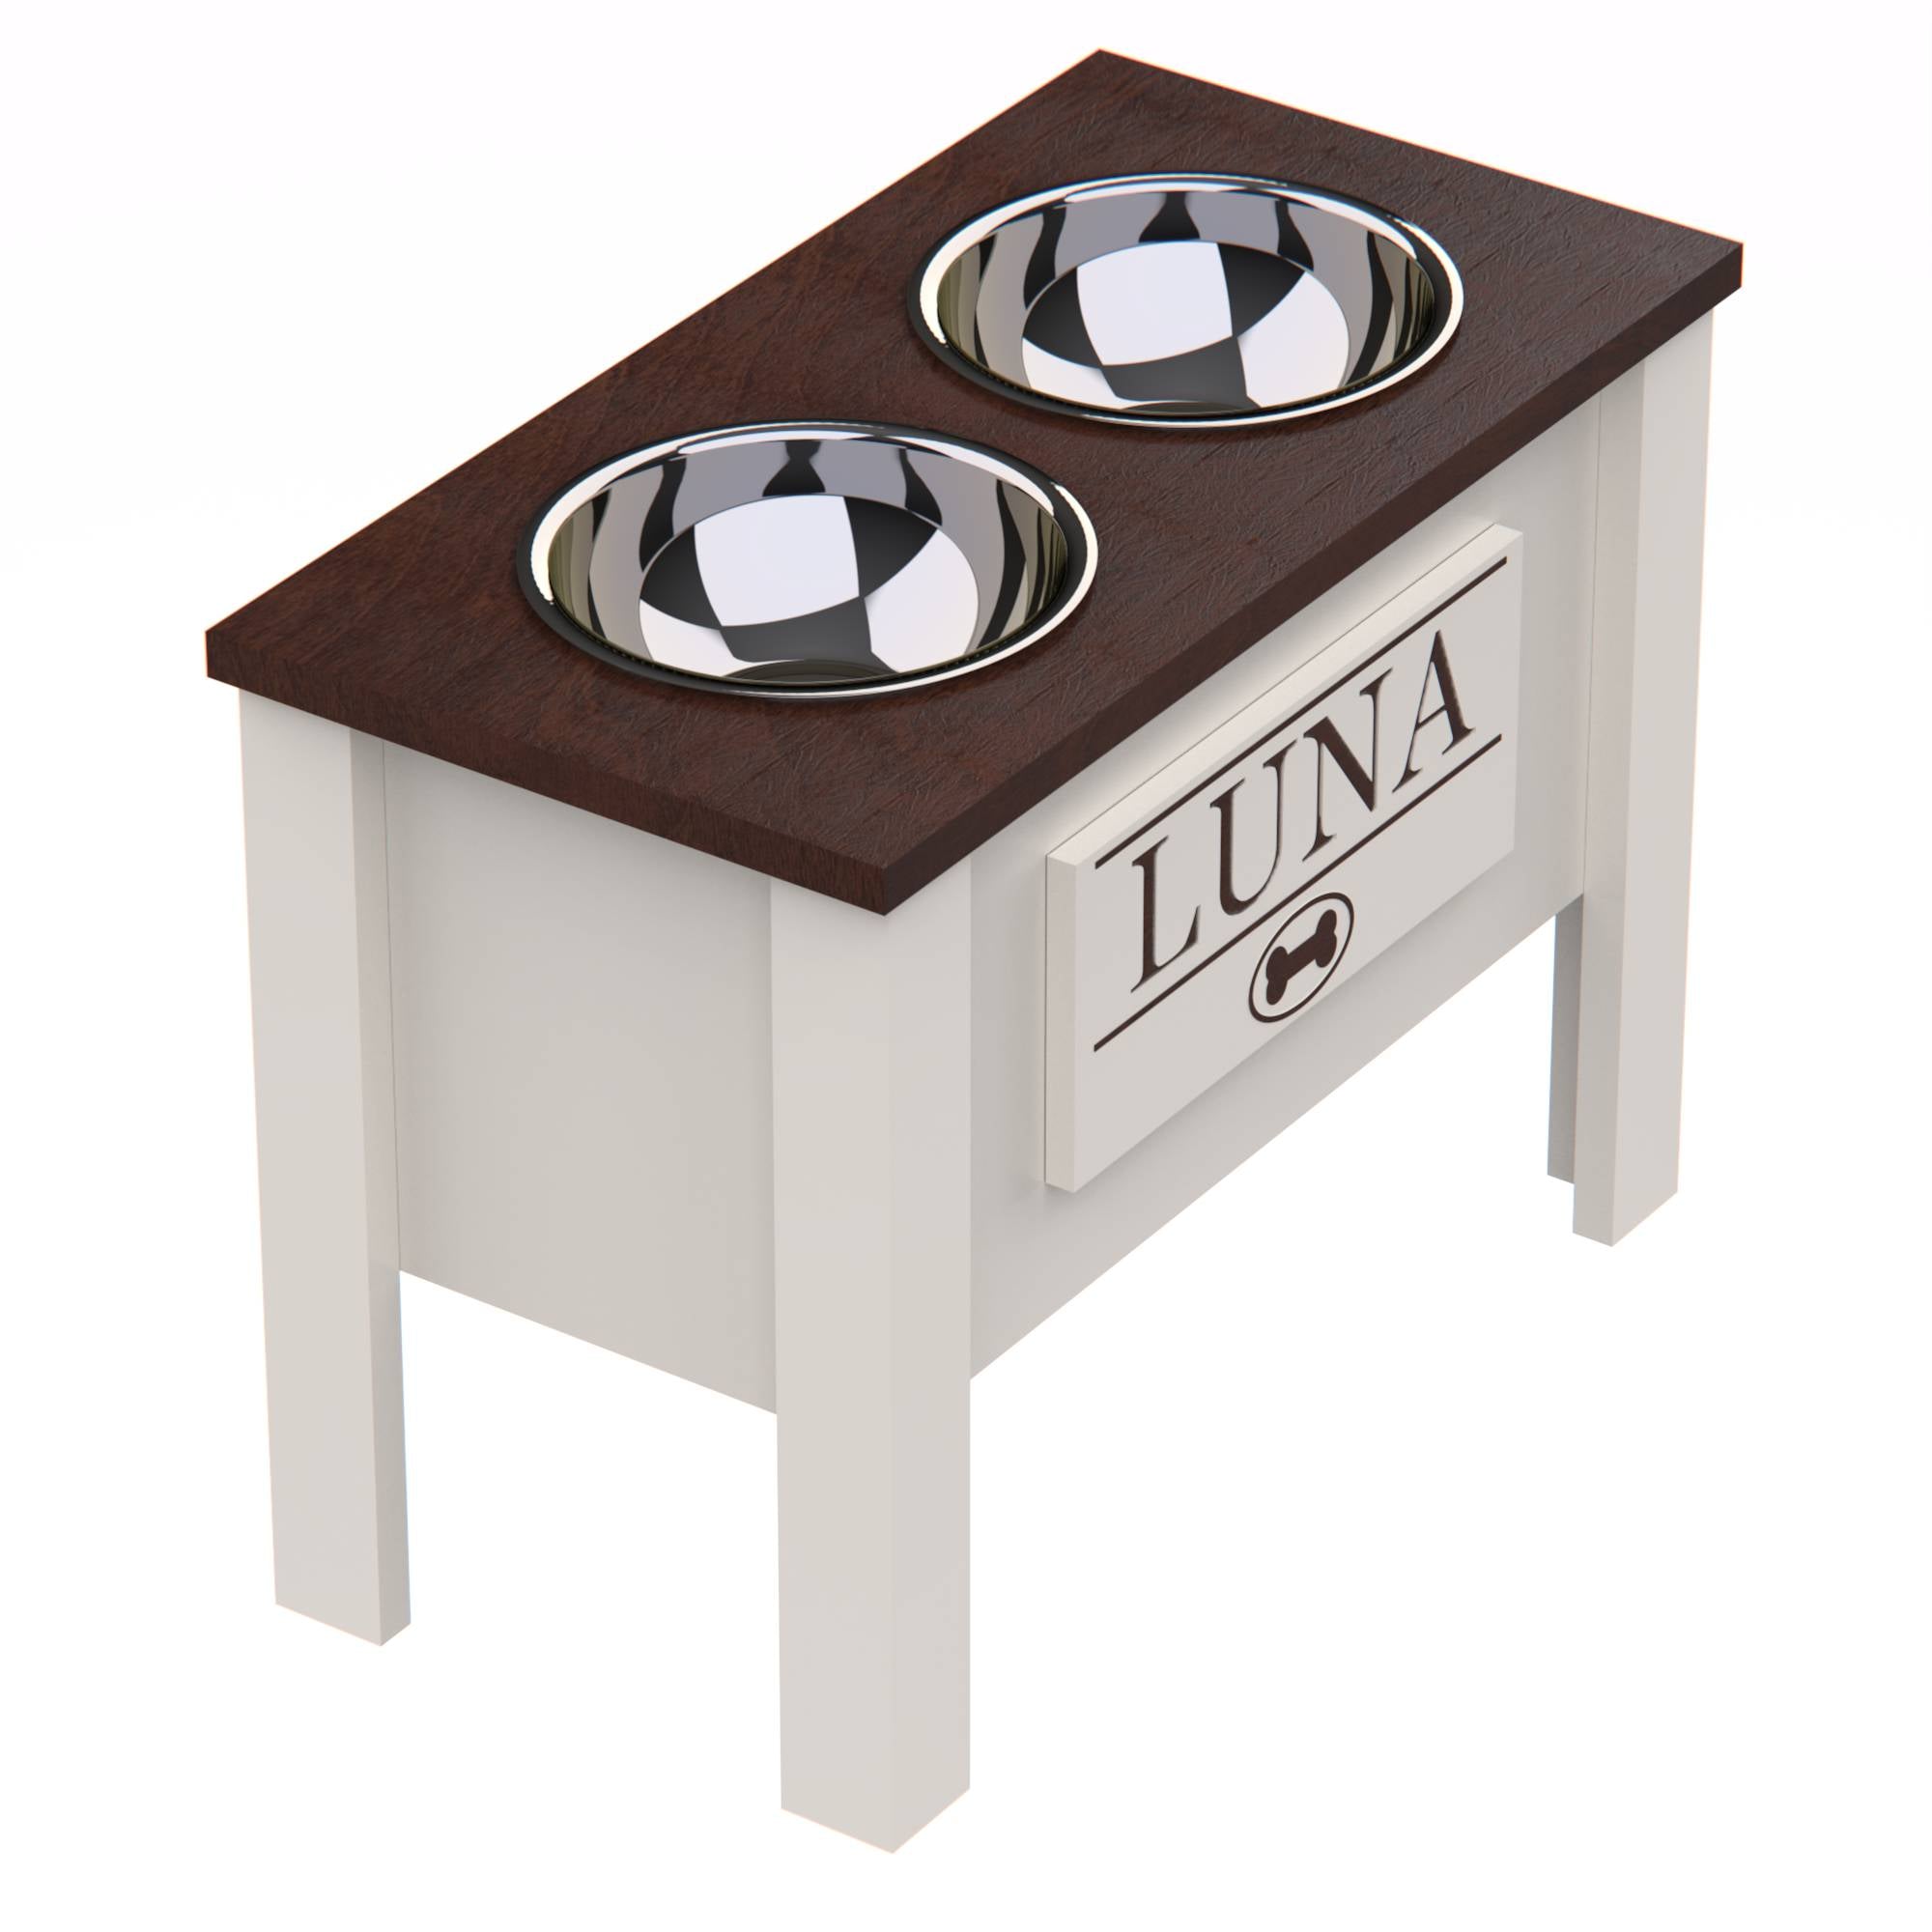 Personalized Elevated Dog Bowl in Dark Walnut - GrooveThis Woodshop - GT002DW-XL